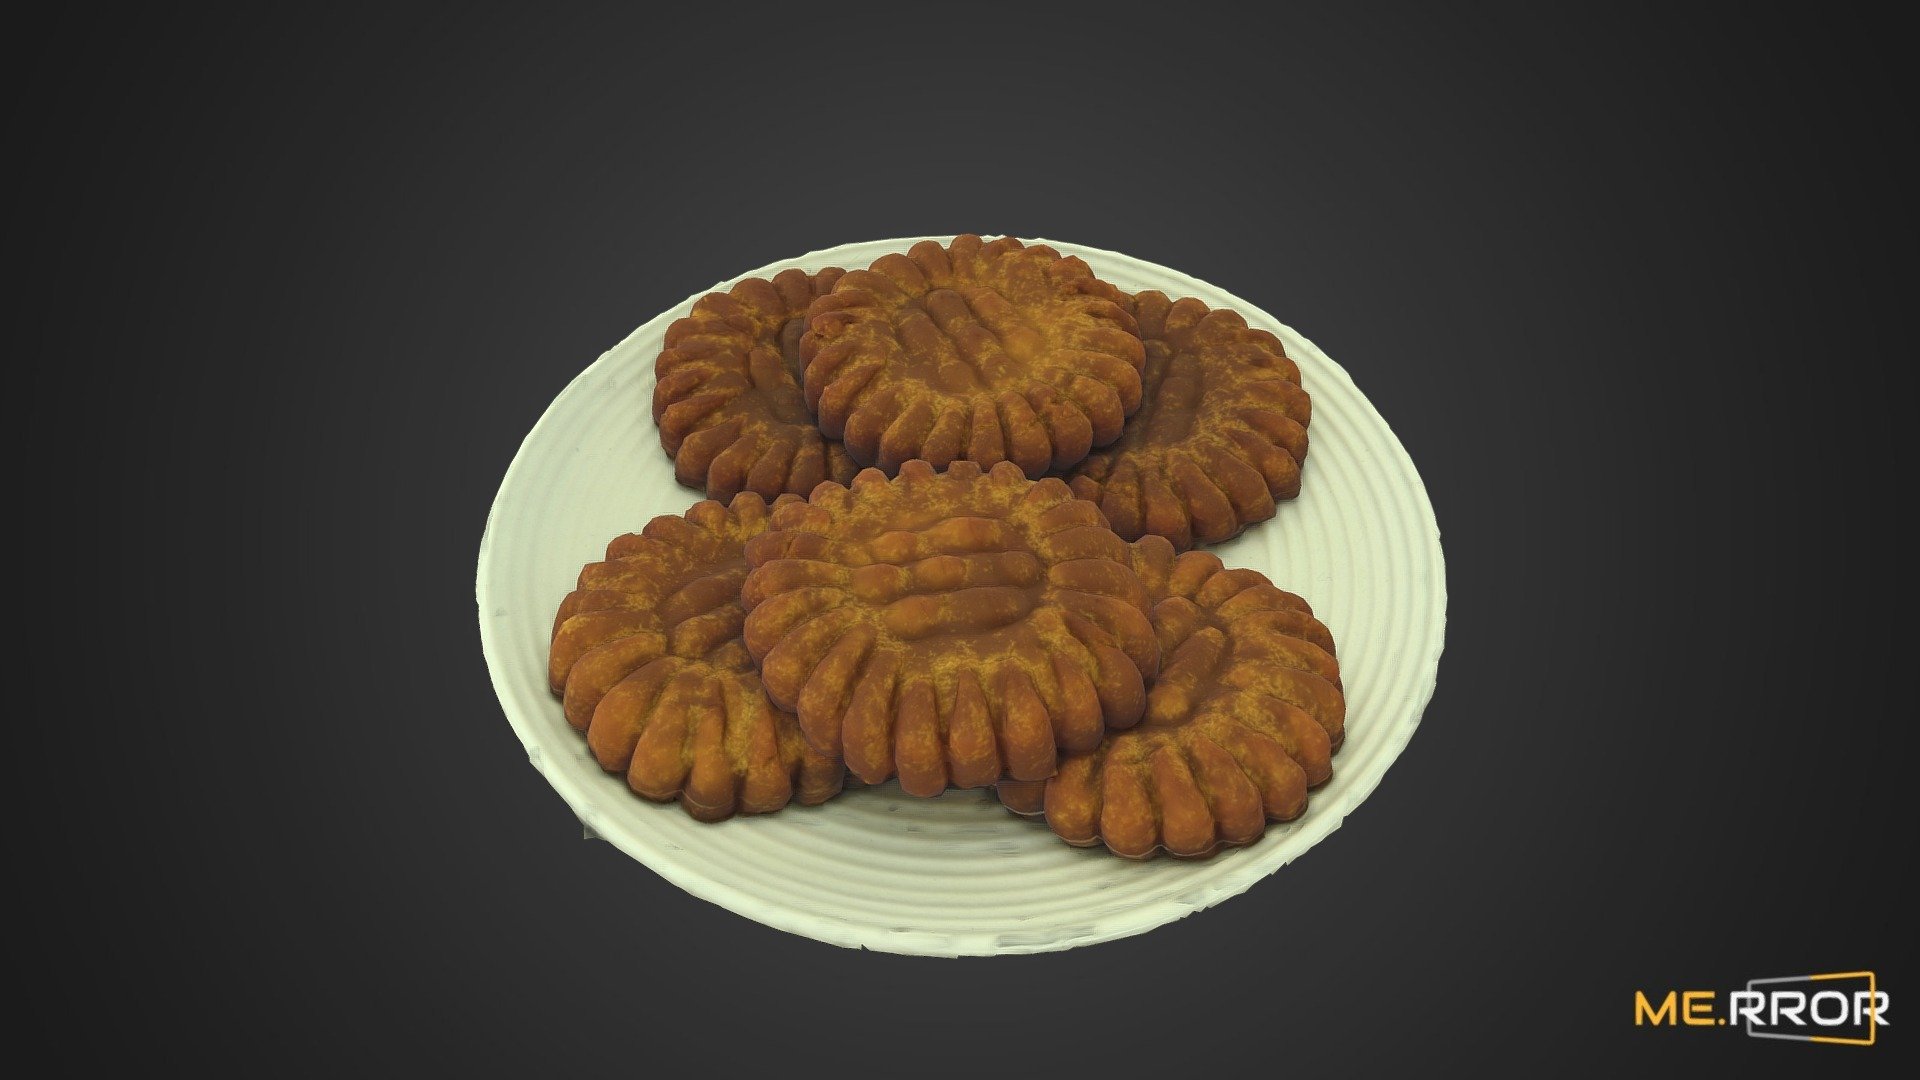 MERROR is a 3D Content PLATFORM which introduces various Asian assets to the 3D world

#3DScanning #Photogrametry #ME.RROR - YakGua Korean honey pastry sweet cookie - Buy Royalty Free 3D model by ME.RROR Studio (@merror) 3d model